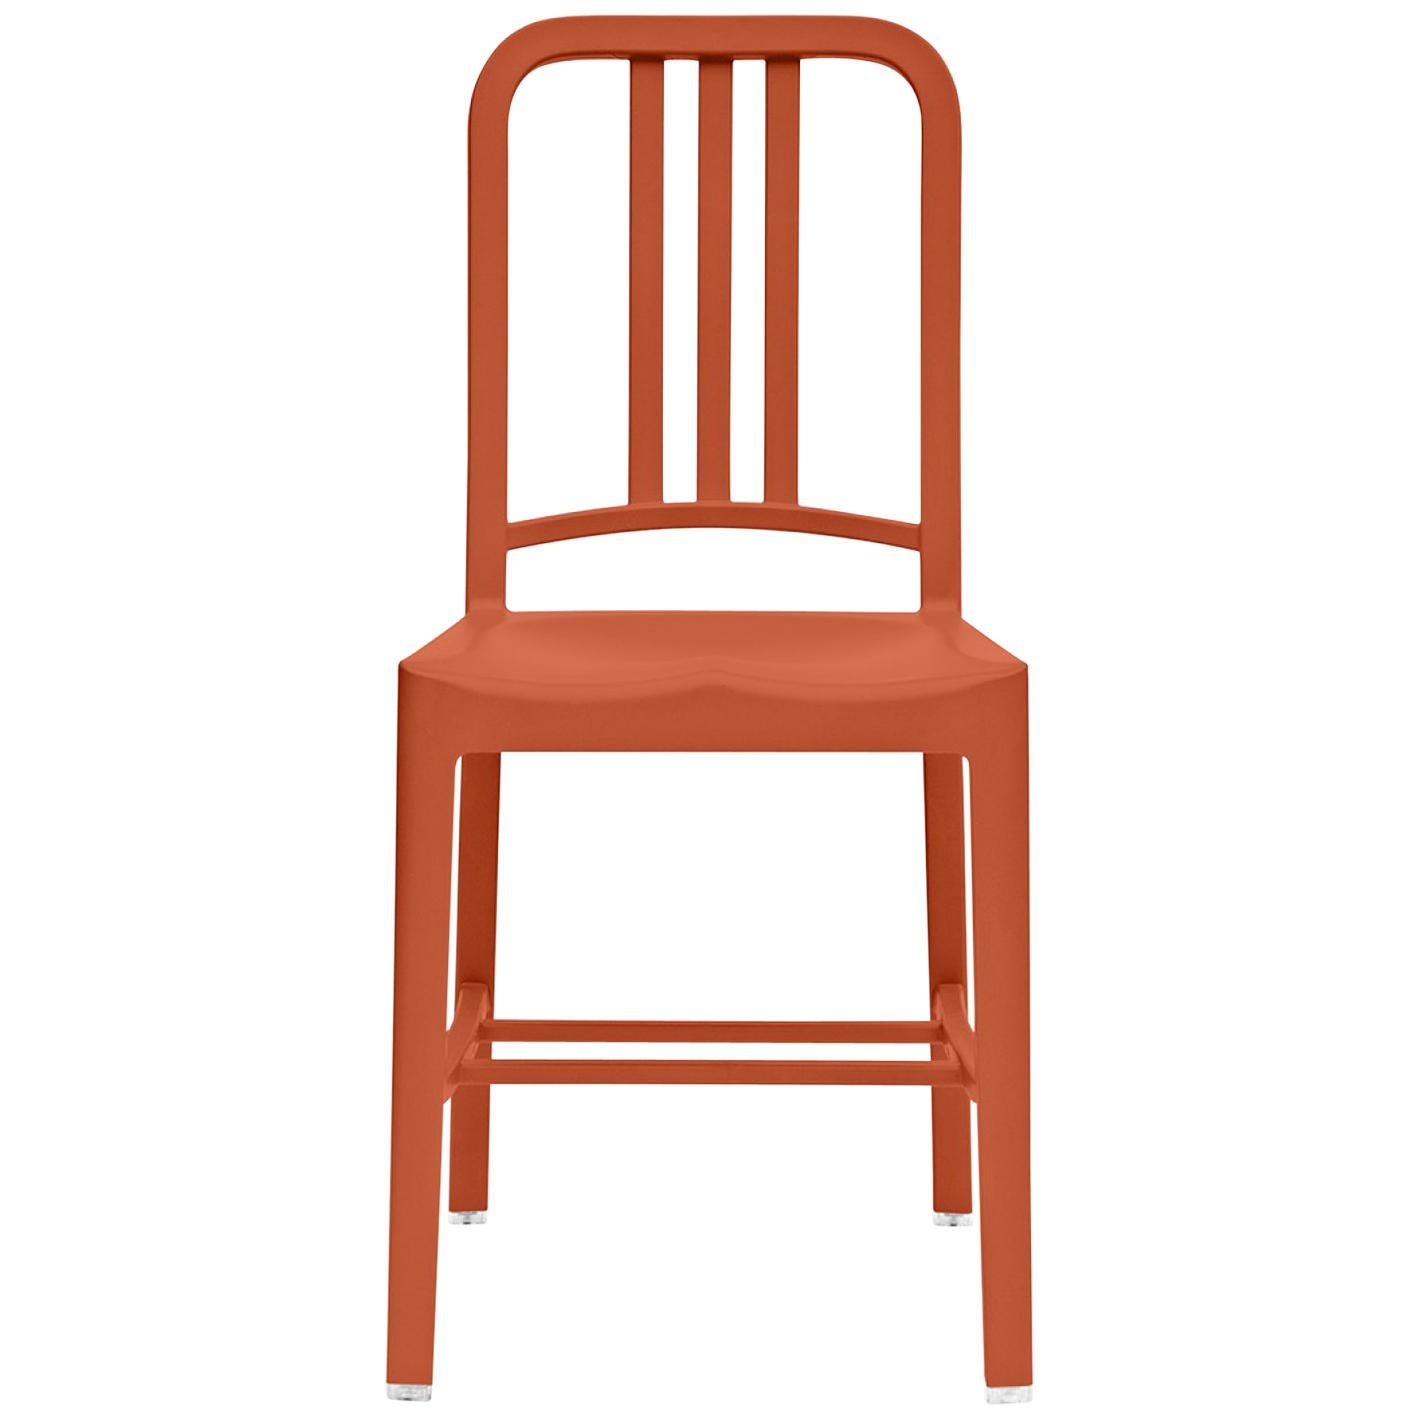 Emeco 111 Navy Chair in Persimmon by Coca-Cola For Sale